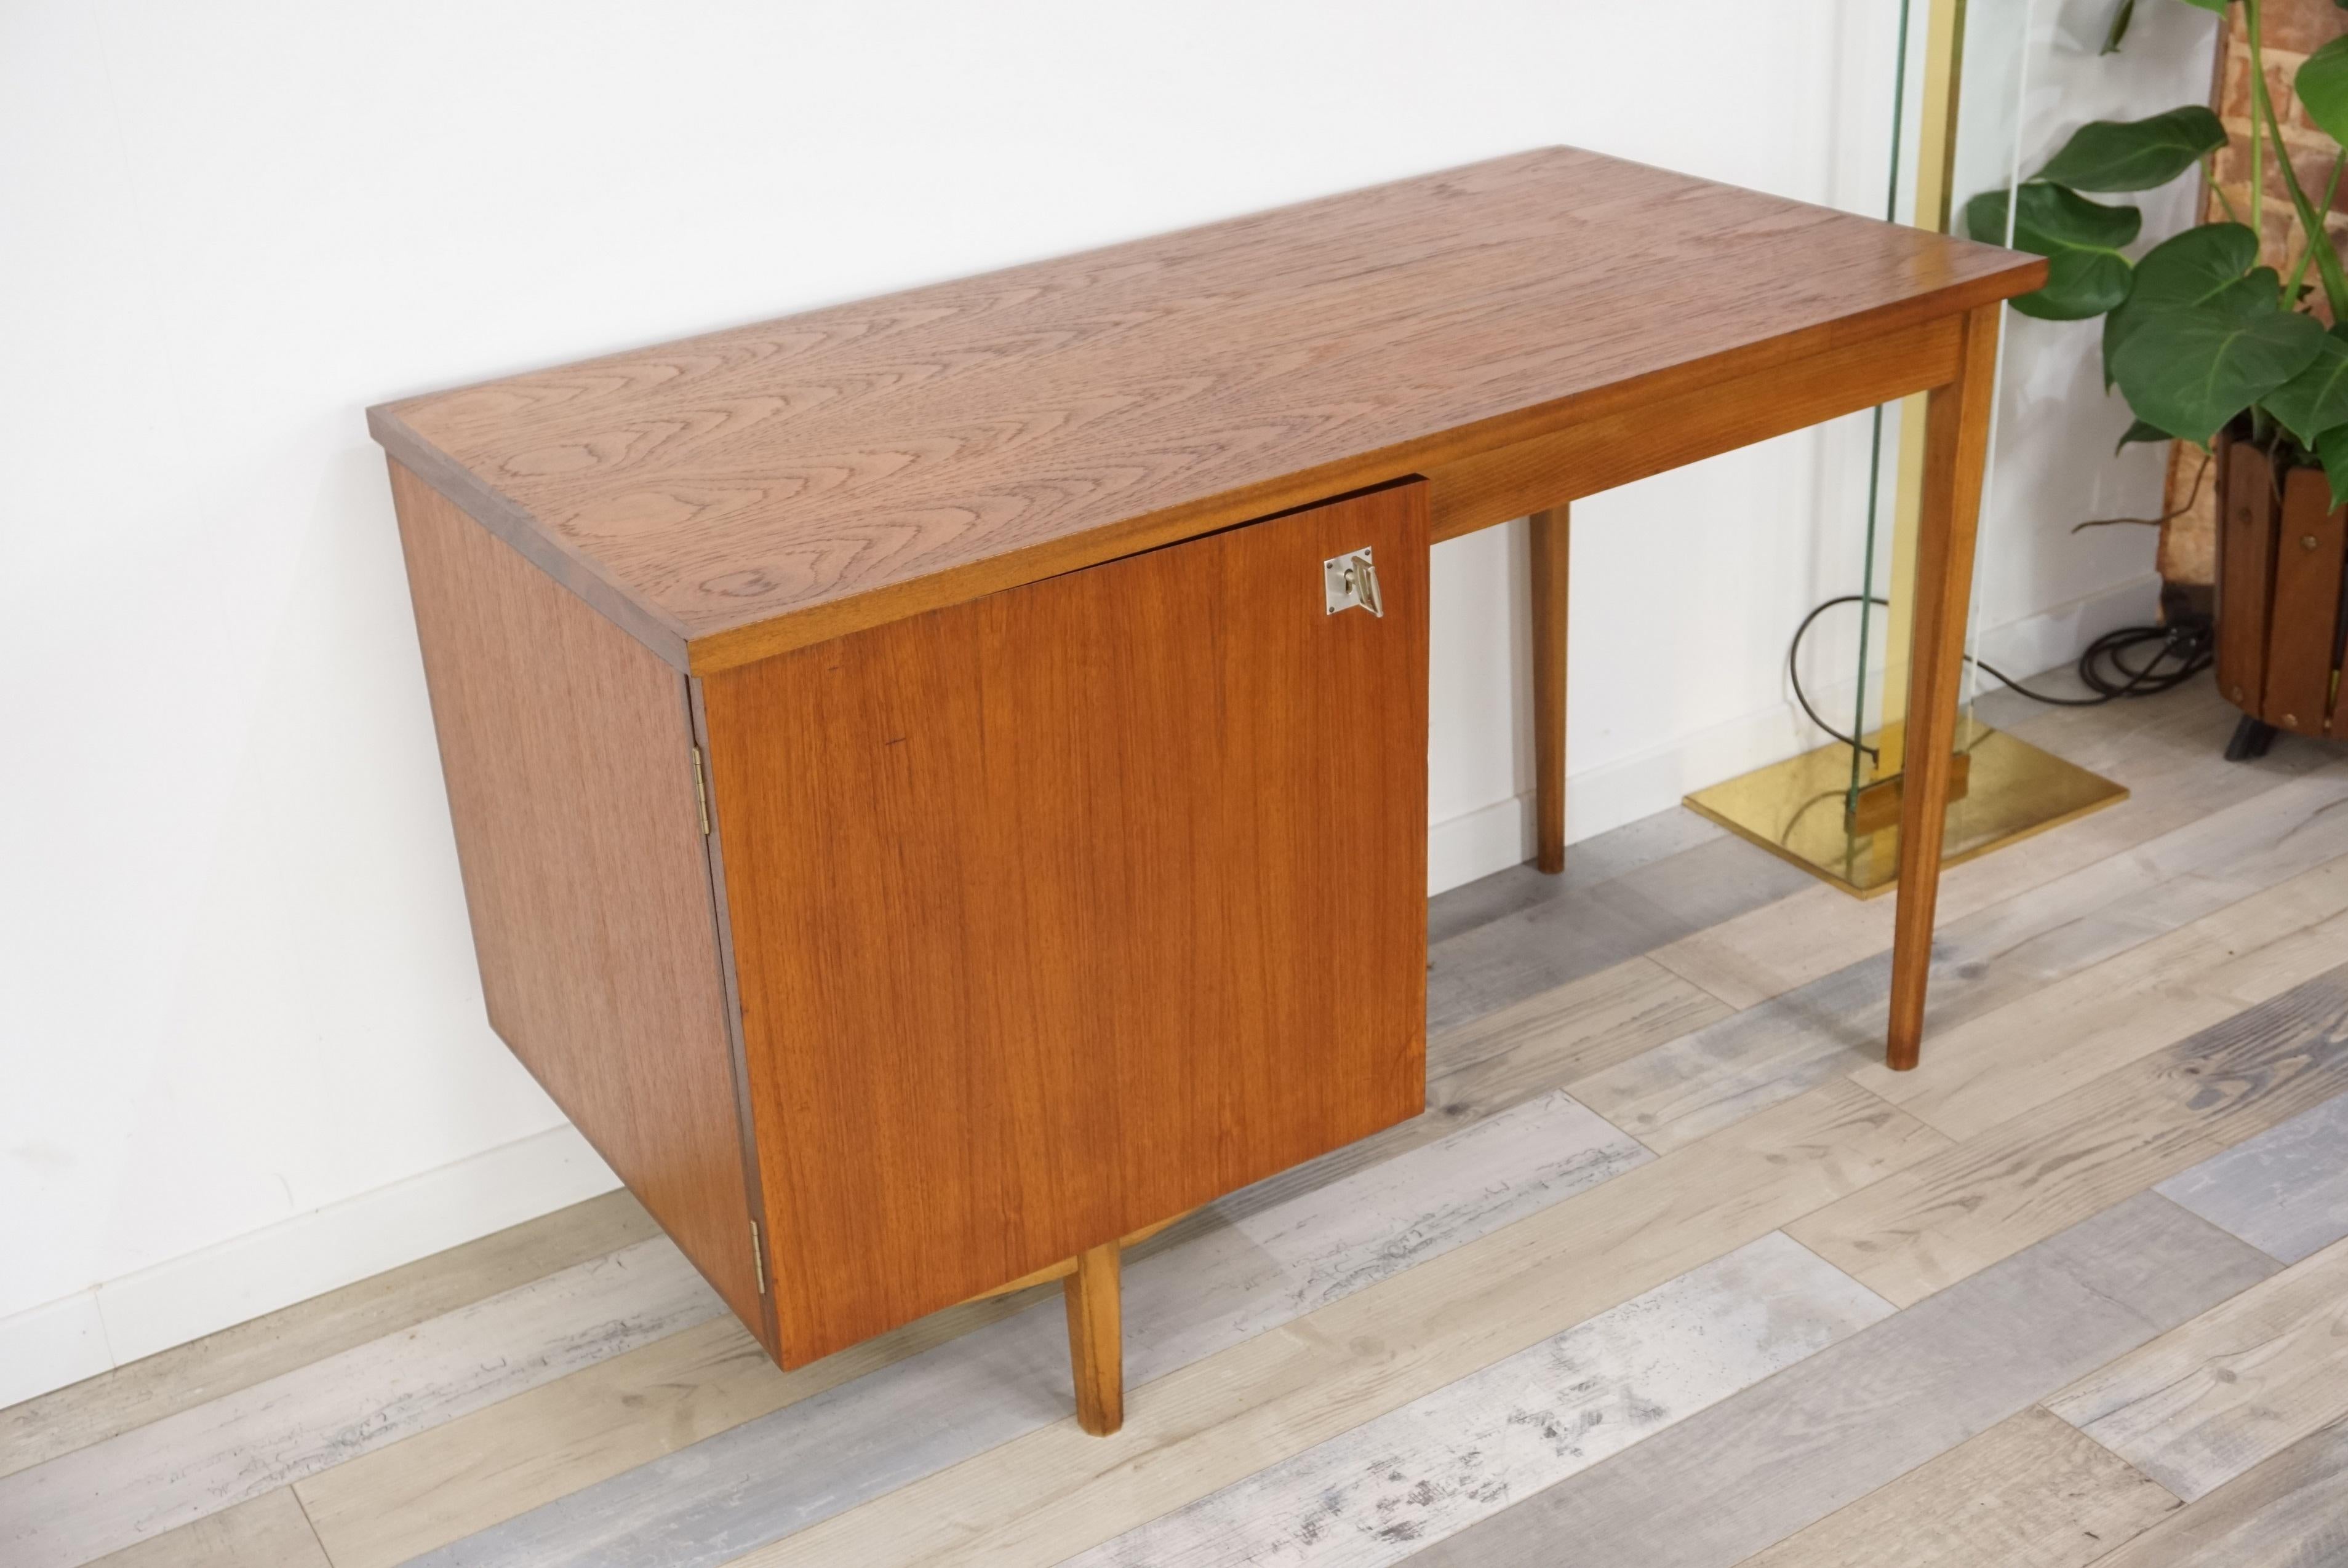 This combineurop brand adorable desk, from the late 1950s, robust and high quality, has graphic timeless lines. Teak wooden structure, compass feet, Beautiful and storage space, lots of charm, class and character, it is in beautiful state of